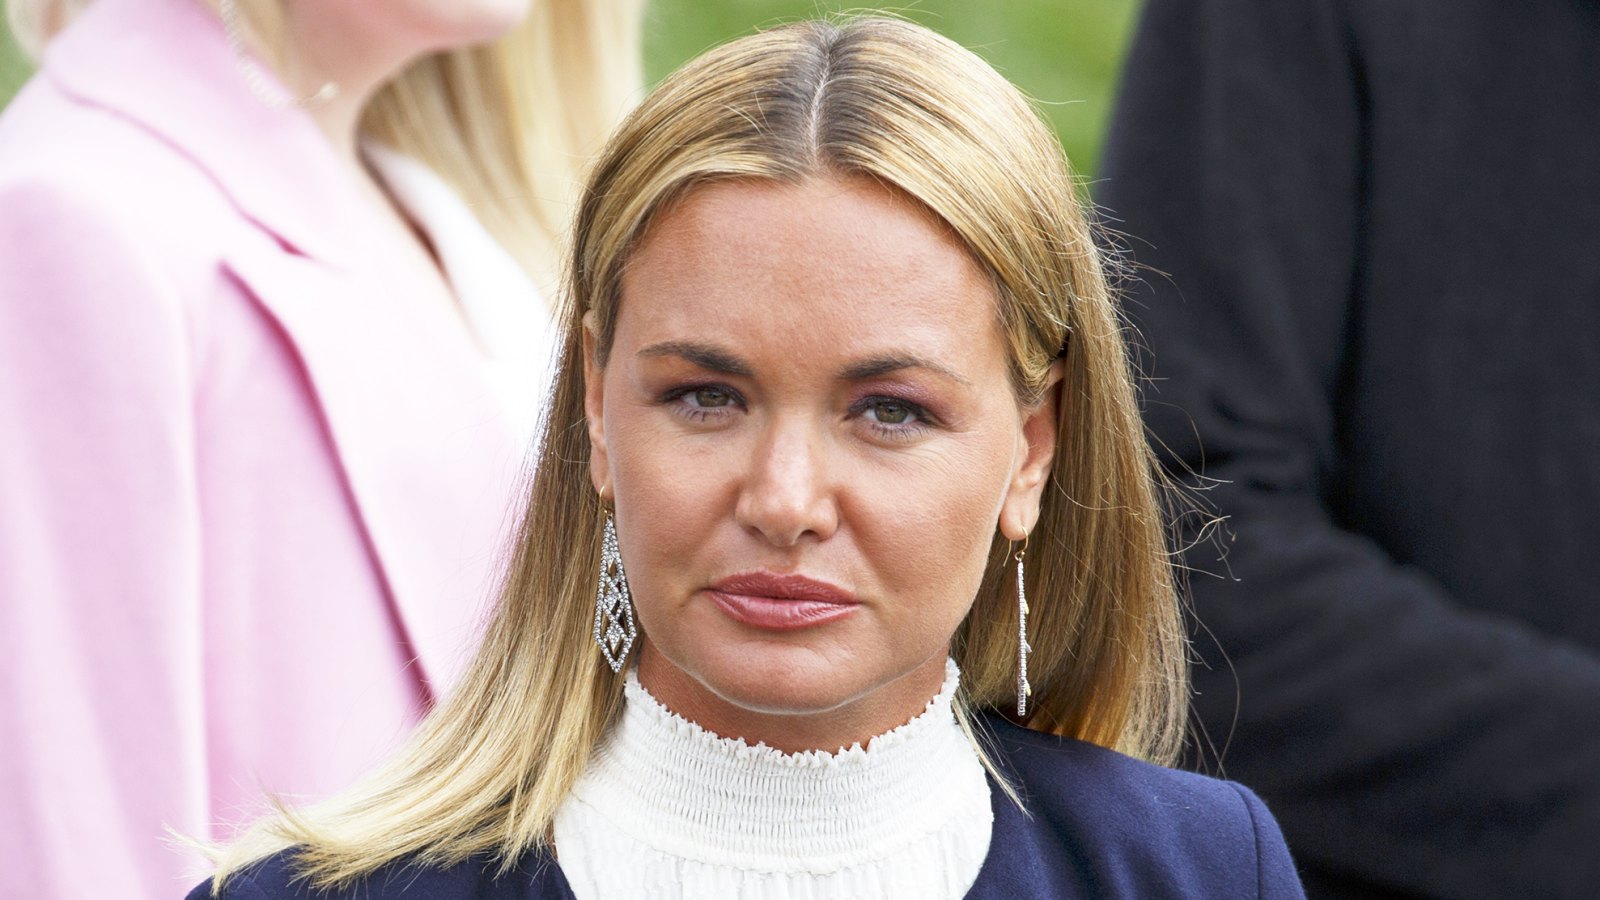 Vanessa Trump, wife of Donald Trump Jr., attends the Easter Egg Roll on the South Lawn of the White House in Washington, Washington, D.C. on April 2, 2018.